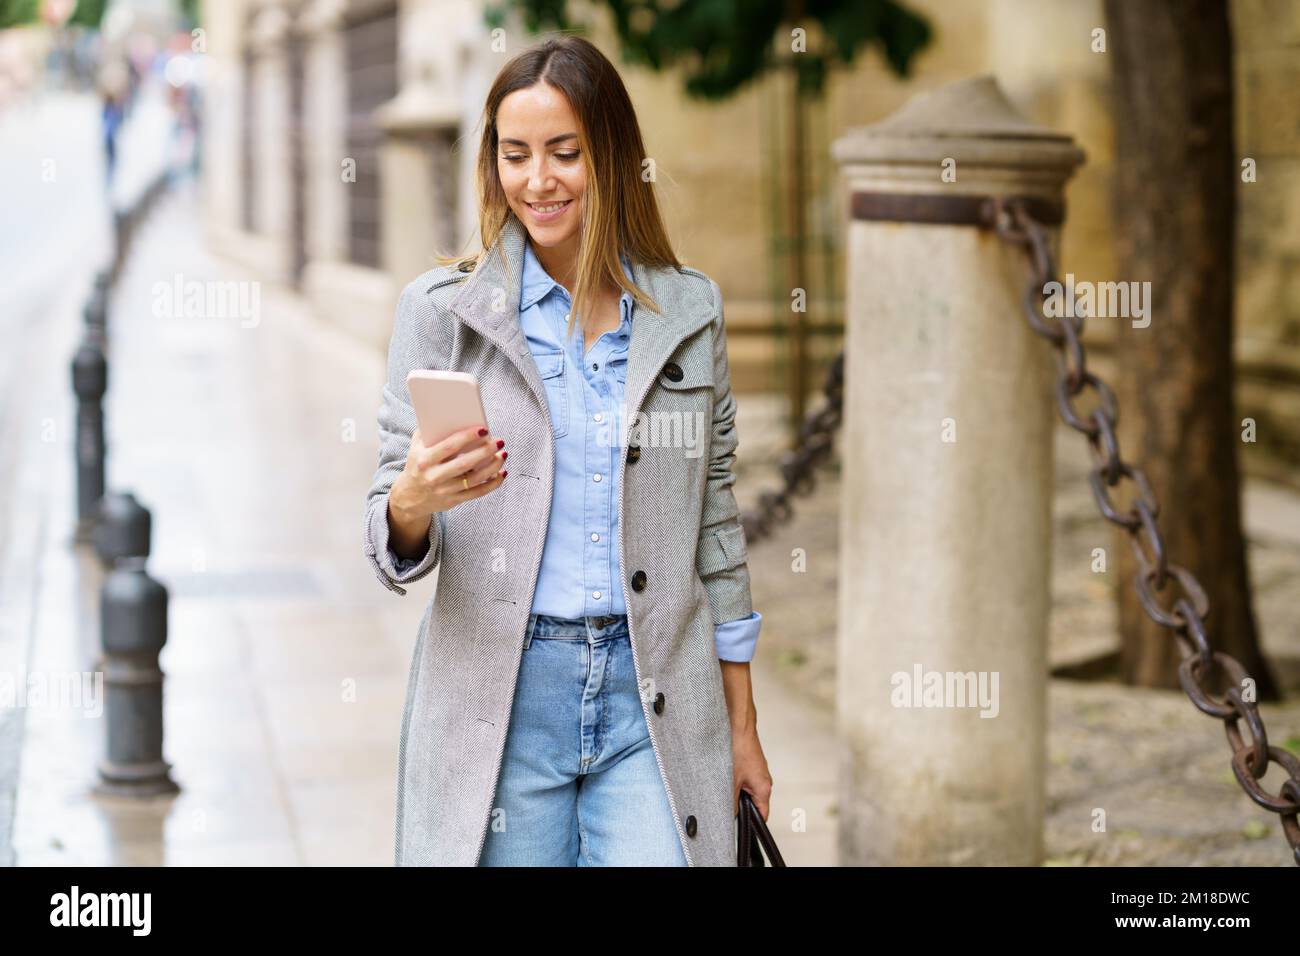 Woman reading messages on cellphone on street Stock Photo